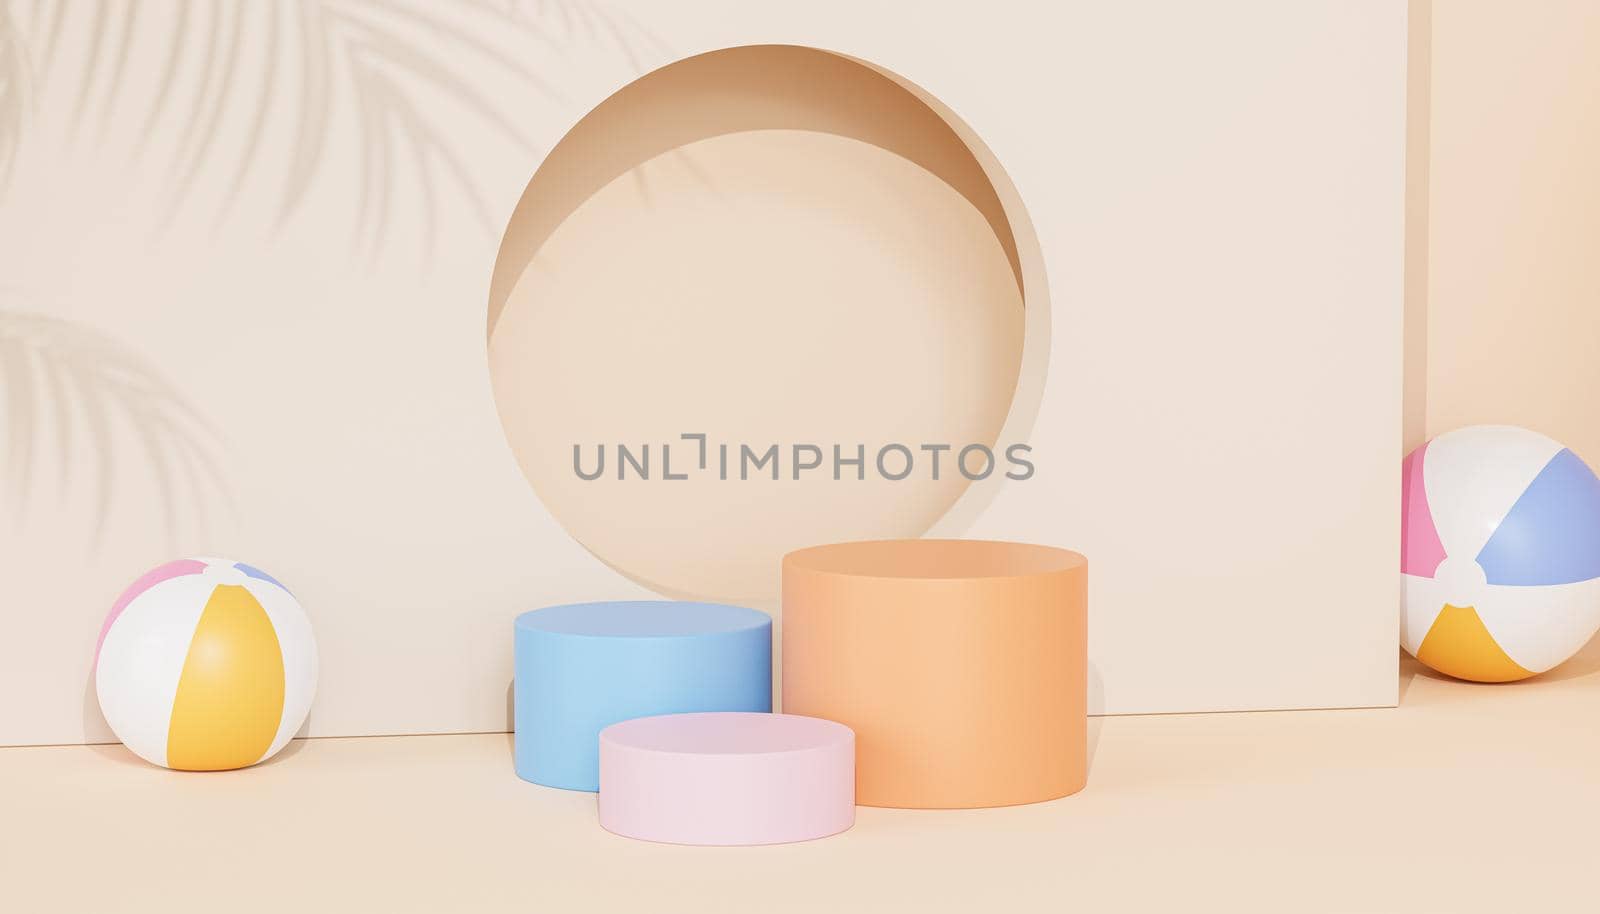 Podiums or pedestals for products or advertising on tropical beige background with beach balls, 3d render by Frostroomhead